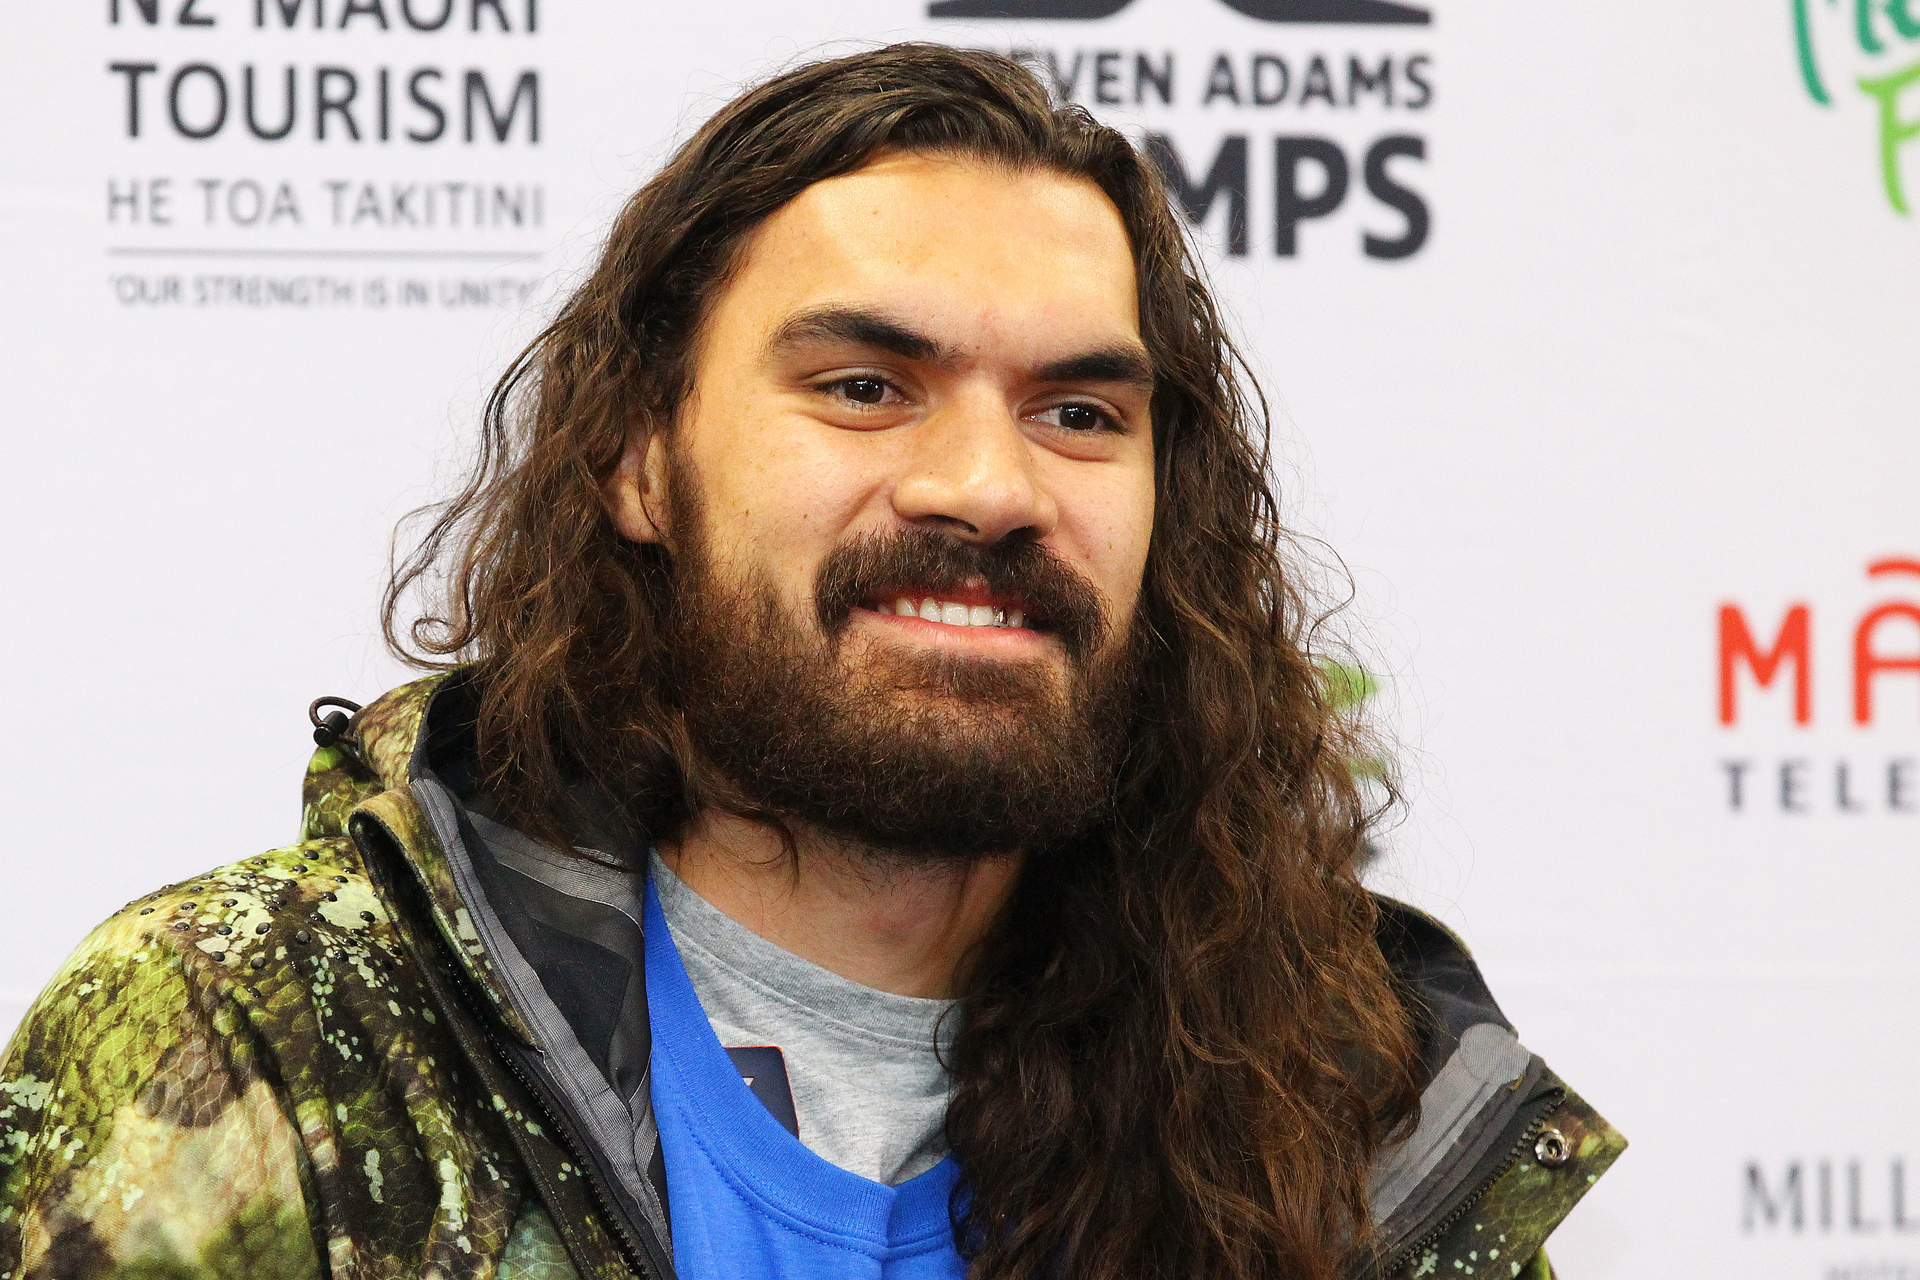 Steven Adams turns 27 today. His transformation since entering the league  at 20 is wild 🤯